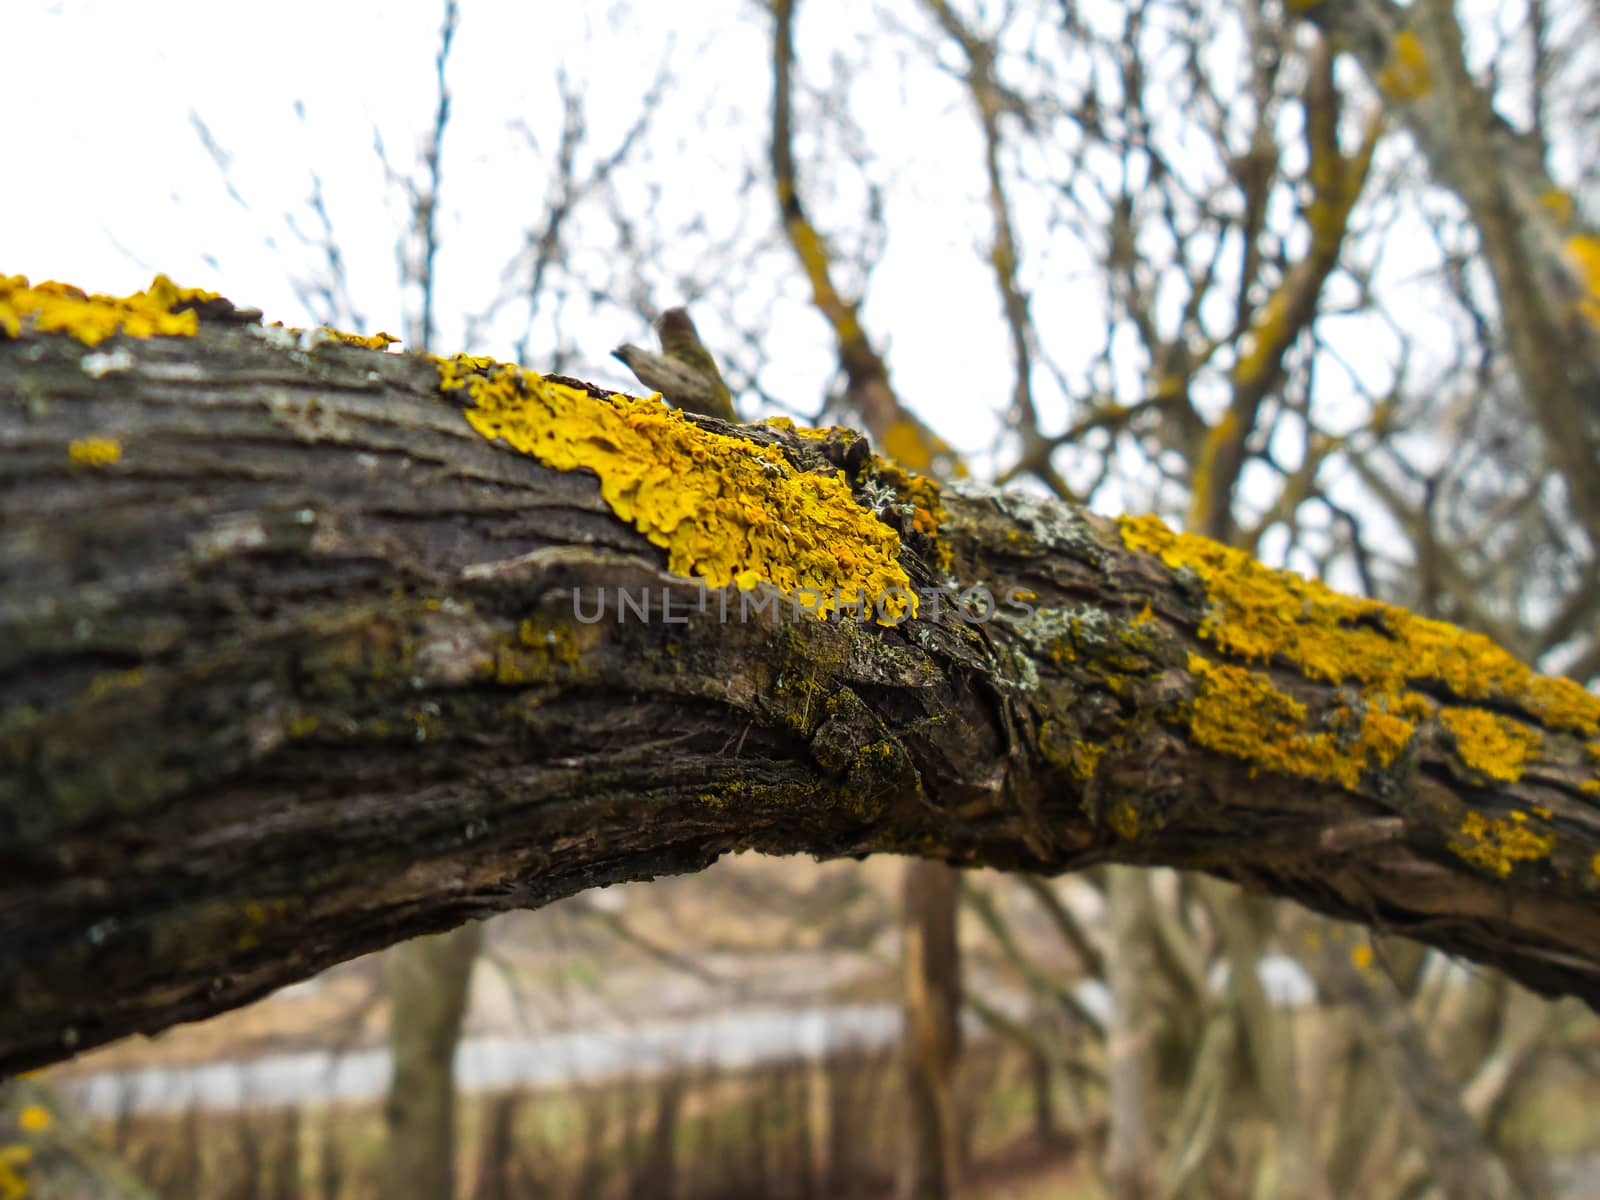 Closeup of yellow lichen on a branch in front of a tree with more lichen